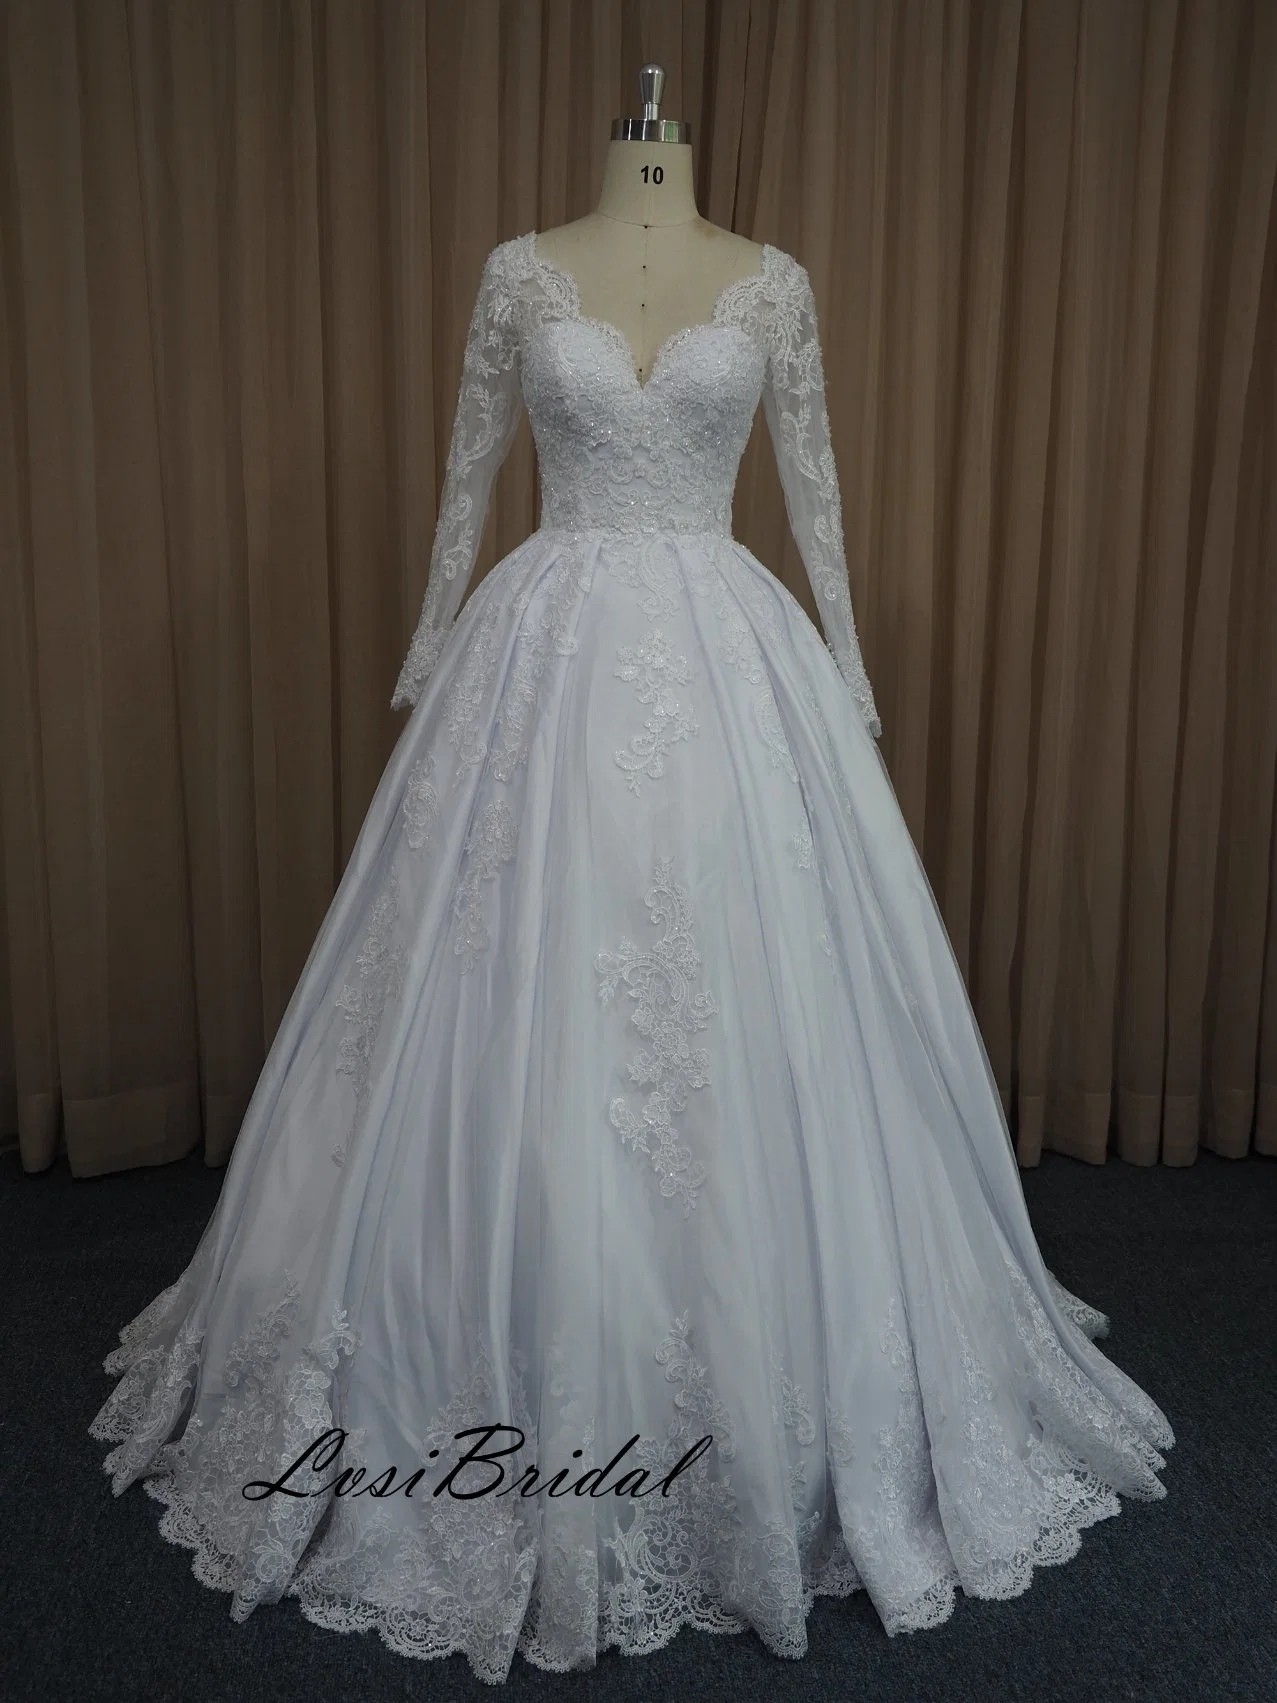 1182 Long Sleeve and V Neckline Heavy Beads Wedding Dress with 75 Inch Train Ball Gown Skirt White